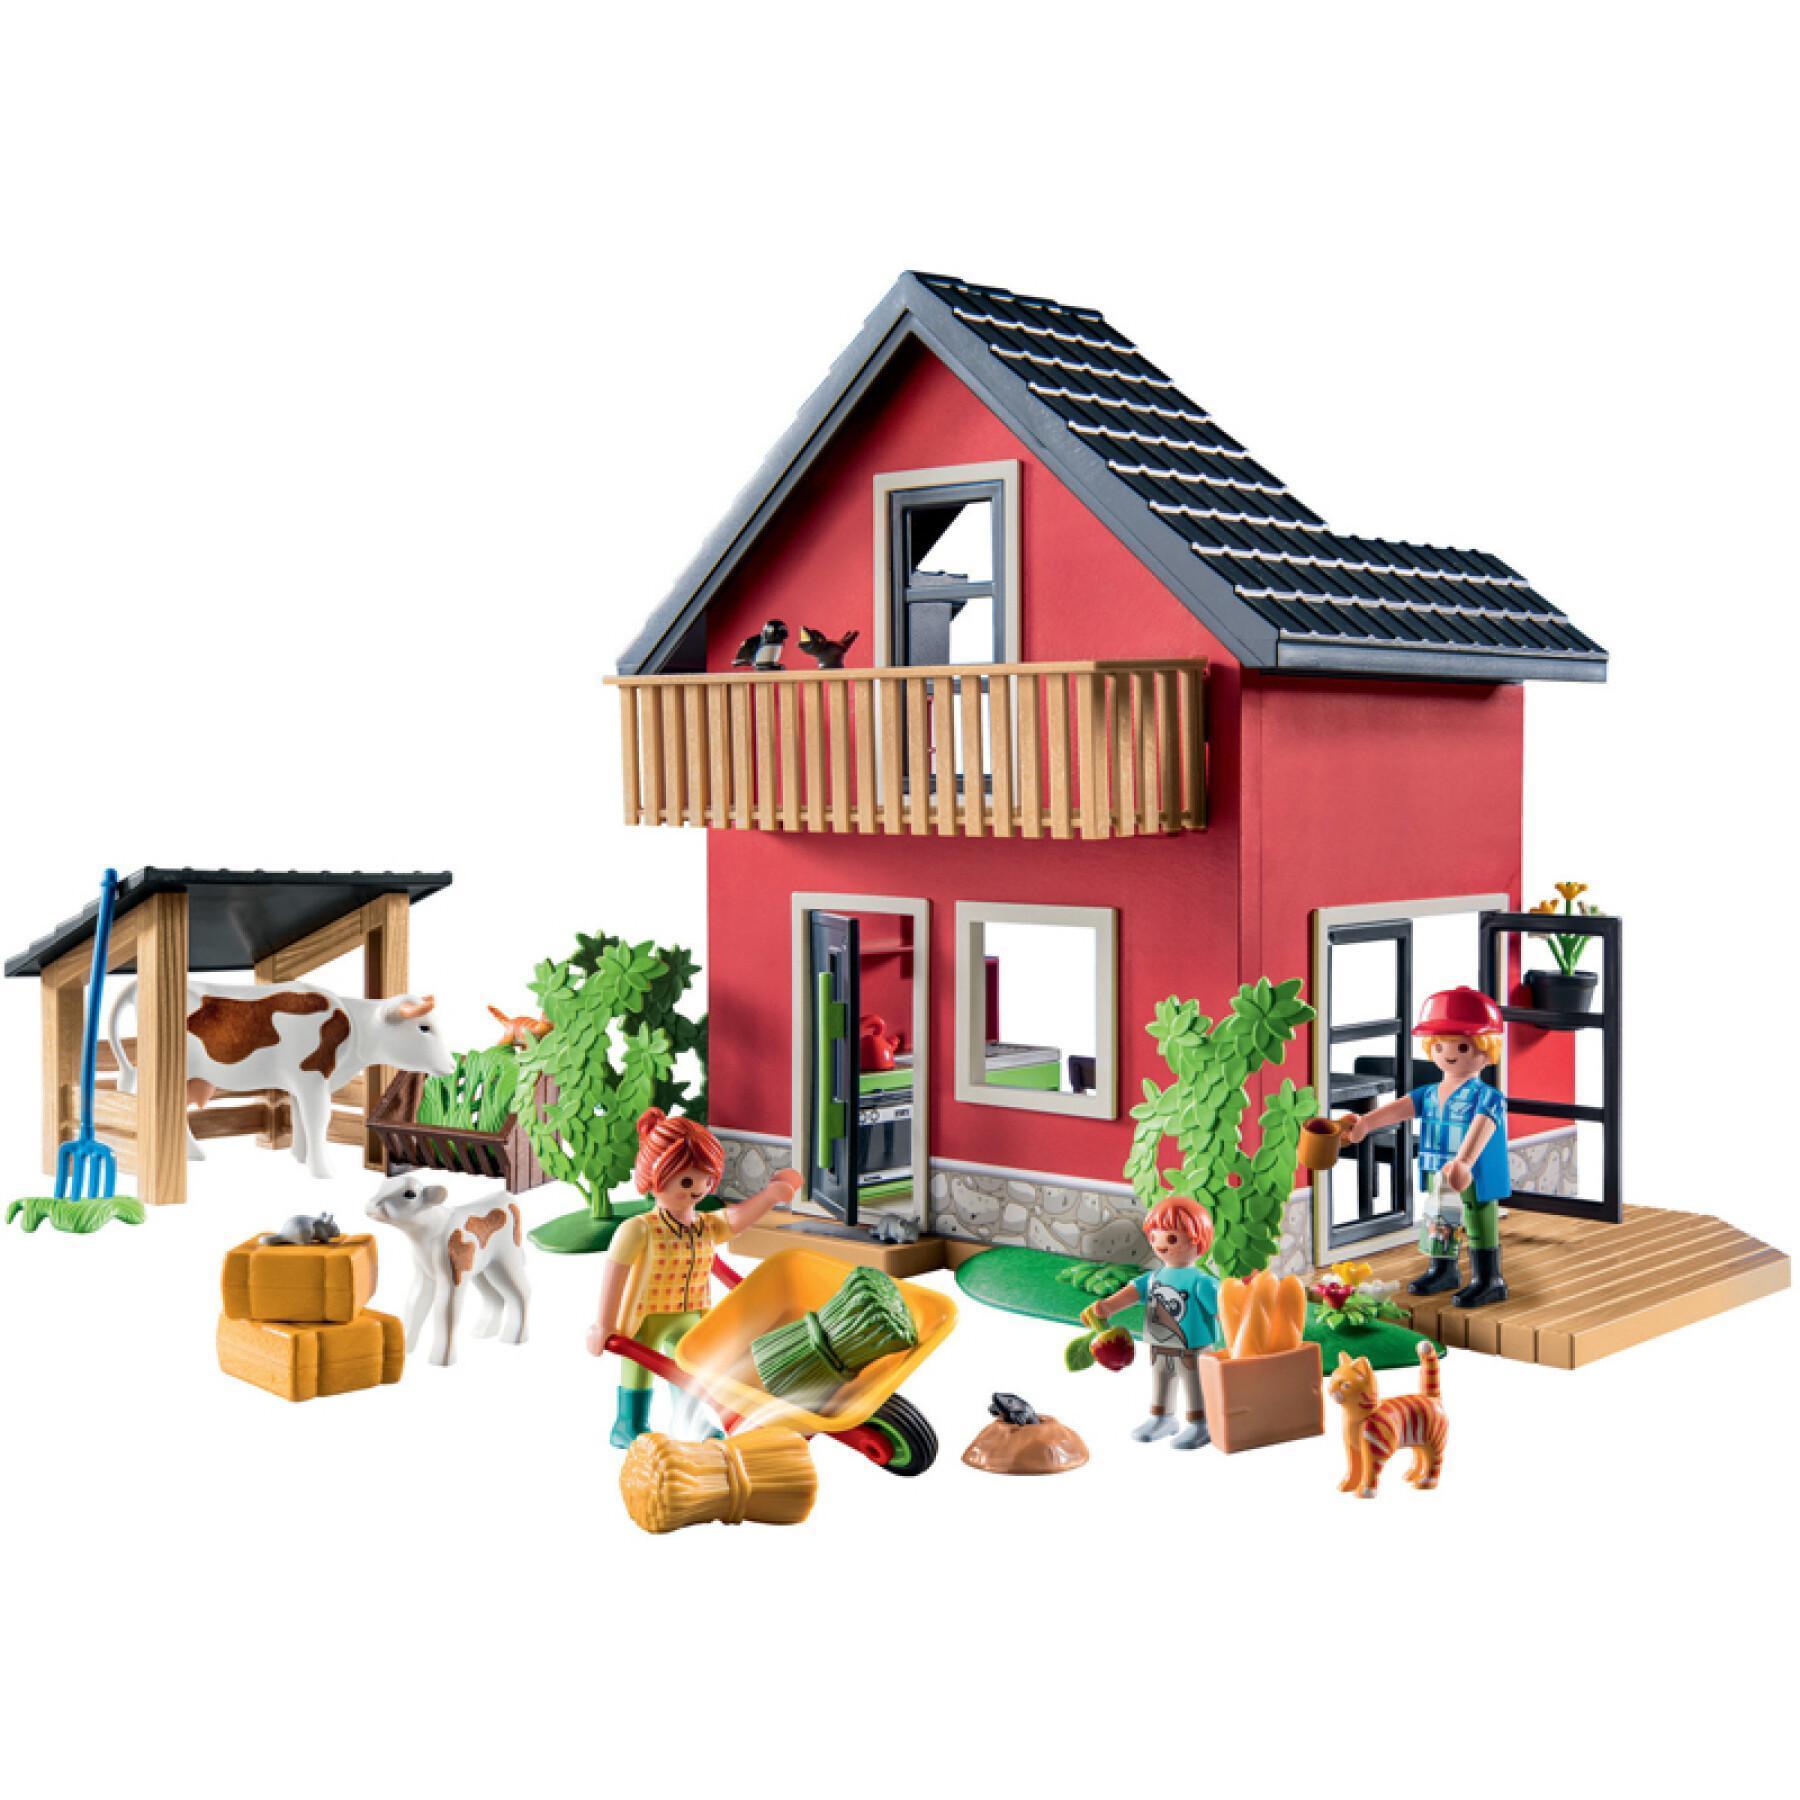 Small farm learning games Playmobil